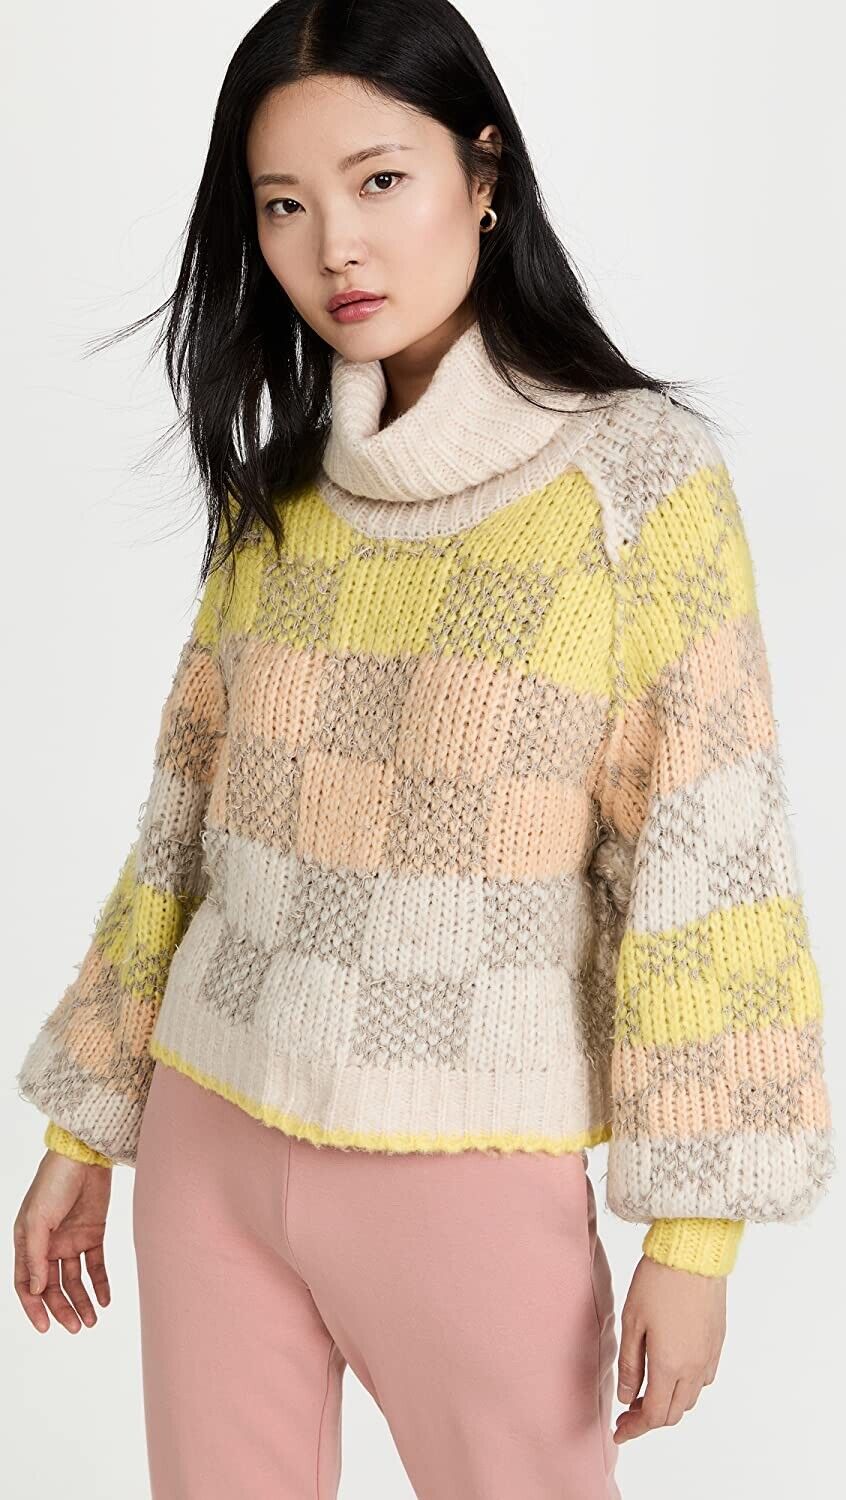 Free People Women's Check Me Out Pullover Sweater, Macaroon Combo, S